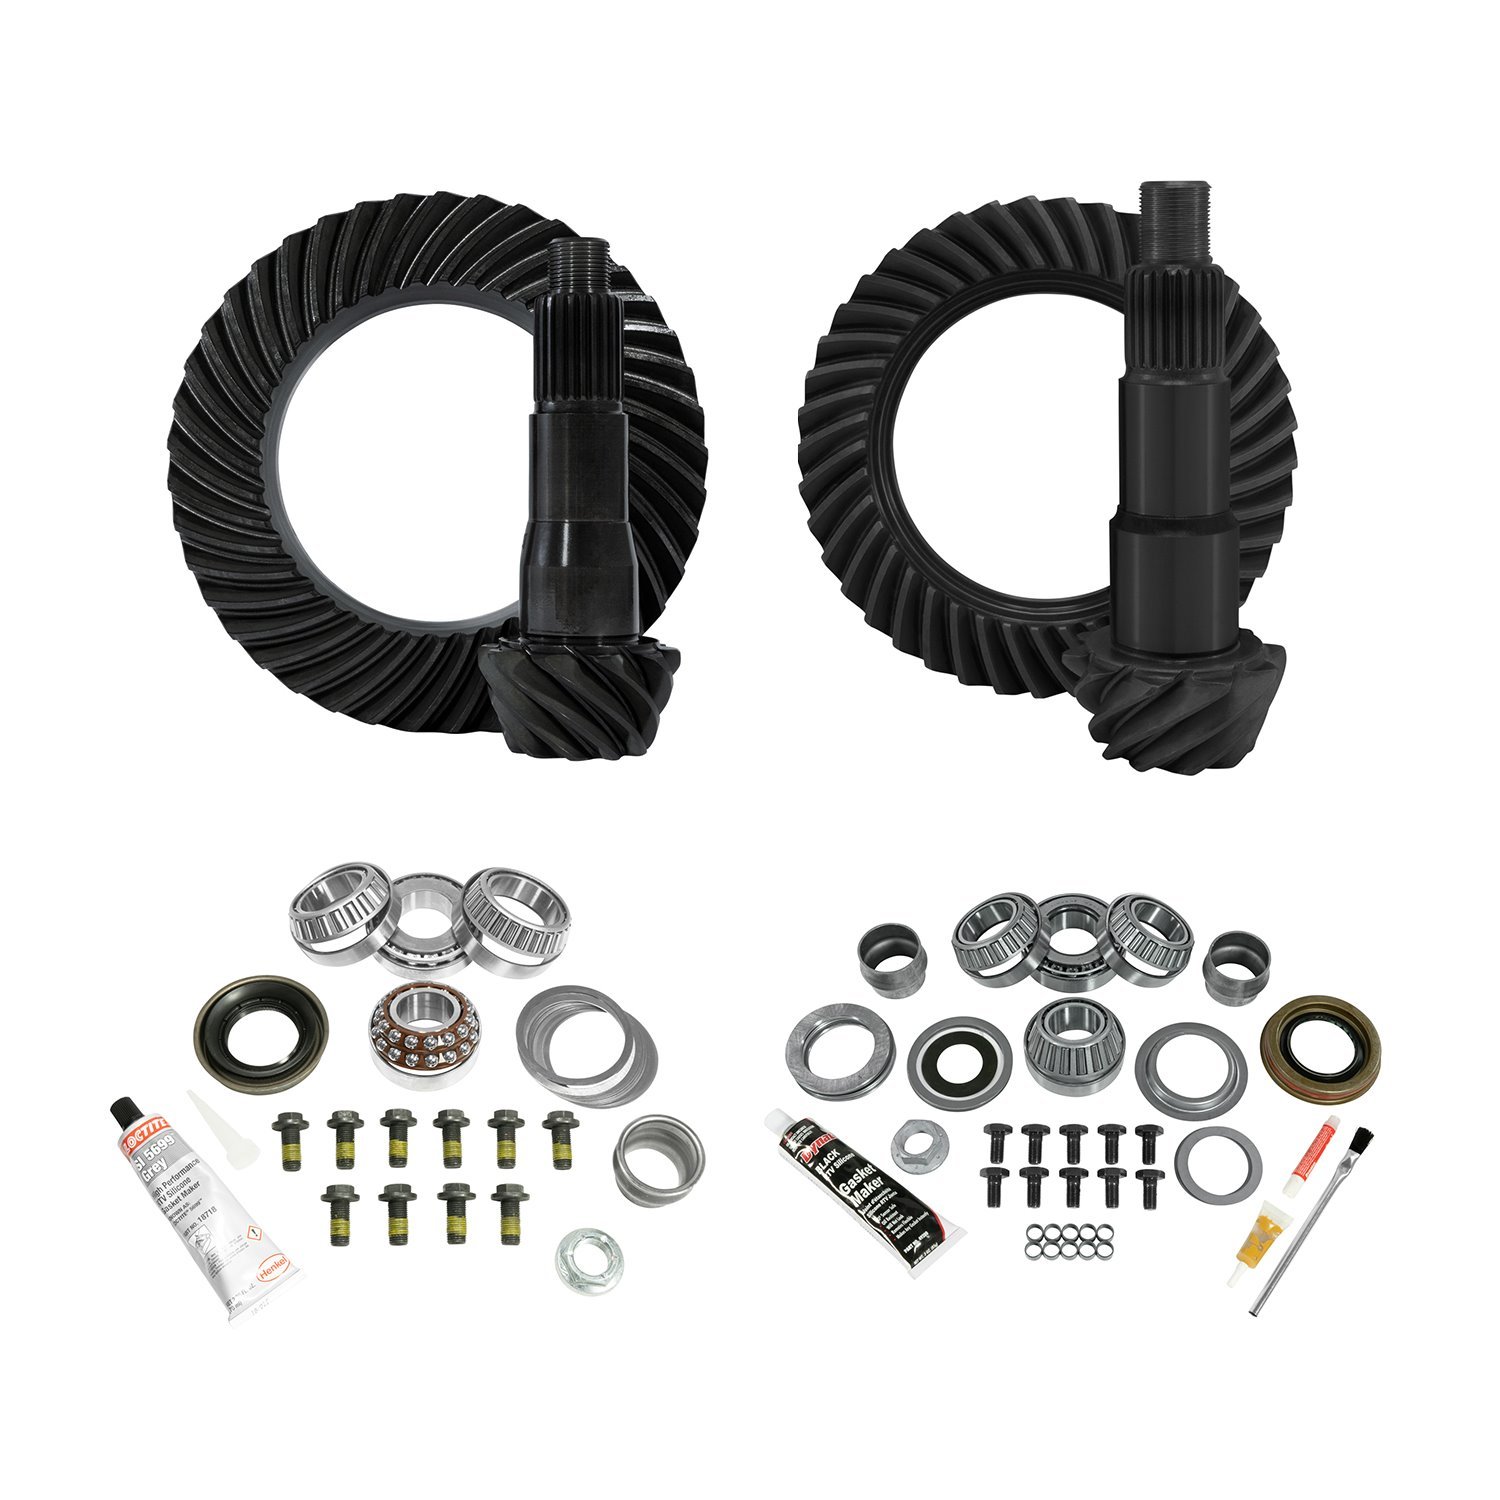 Re-Gear And Install Kit, D30 Front/D35 Rear, Jeep Jl Non-Rubicon, 4.11